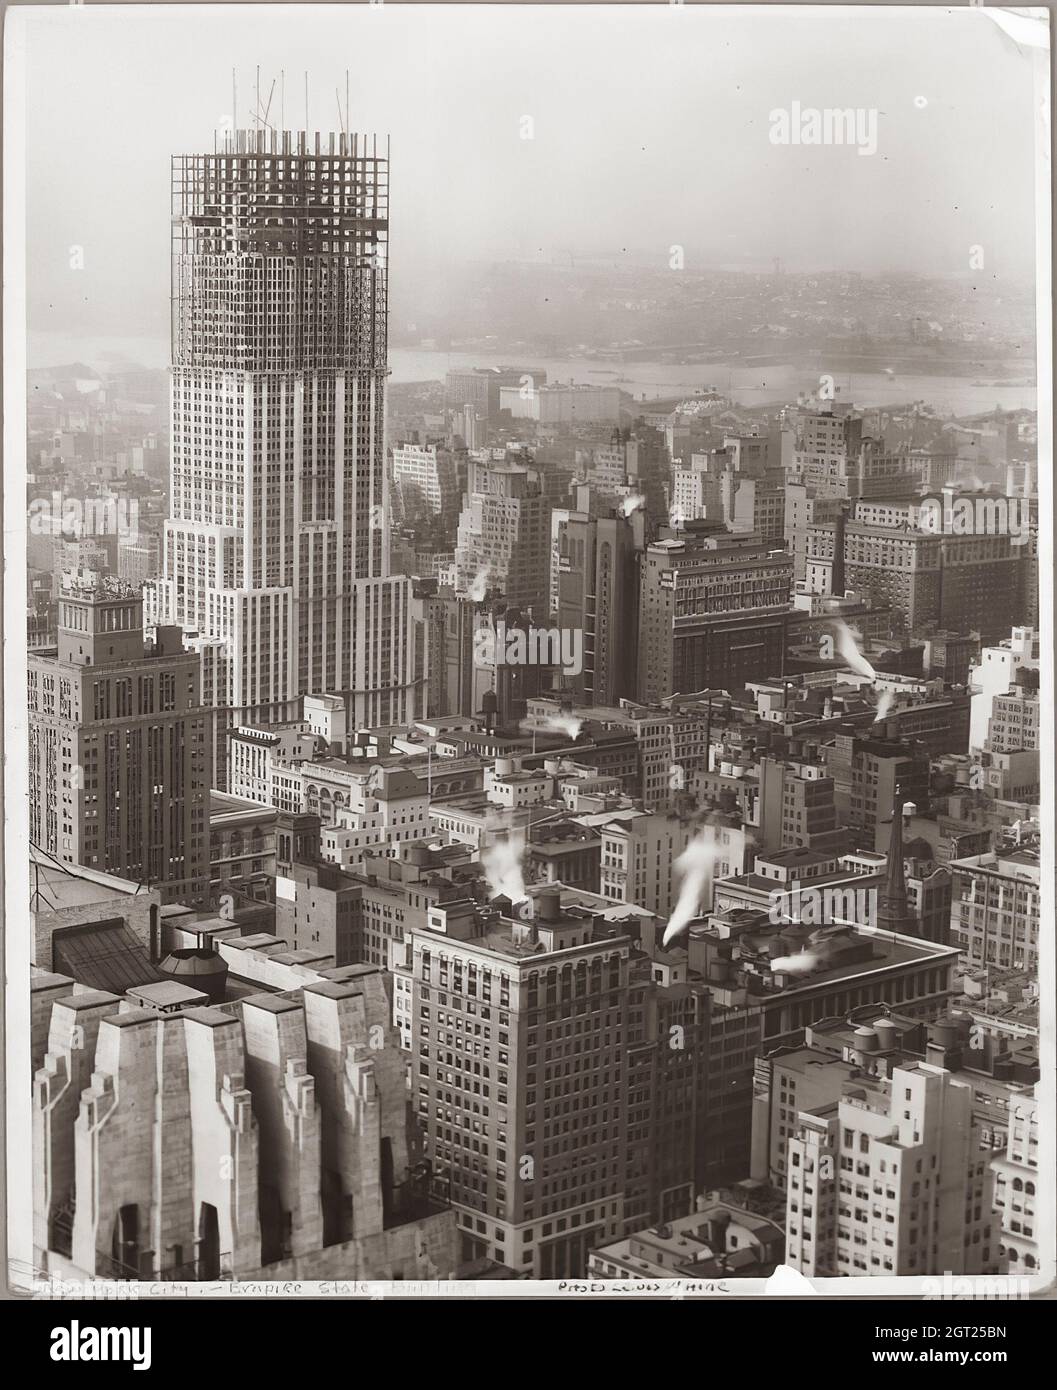 EMPIRE STATE BUILDING NY,NY 1930 - 1931. General and detailed views of the Empire State Building under construction showing workers performing various tasks including positioning, welding and riveting steel, hoisting materials and supplies, and operating and repairing machinery. There are also birds-eye views of midtown Manhattan showing other buildings under construction. Photographs by: Hine, Lewis Wickes, 1874-1940 . Stock Photo